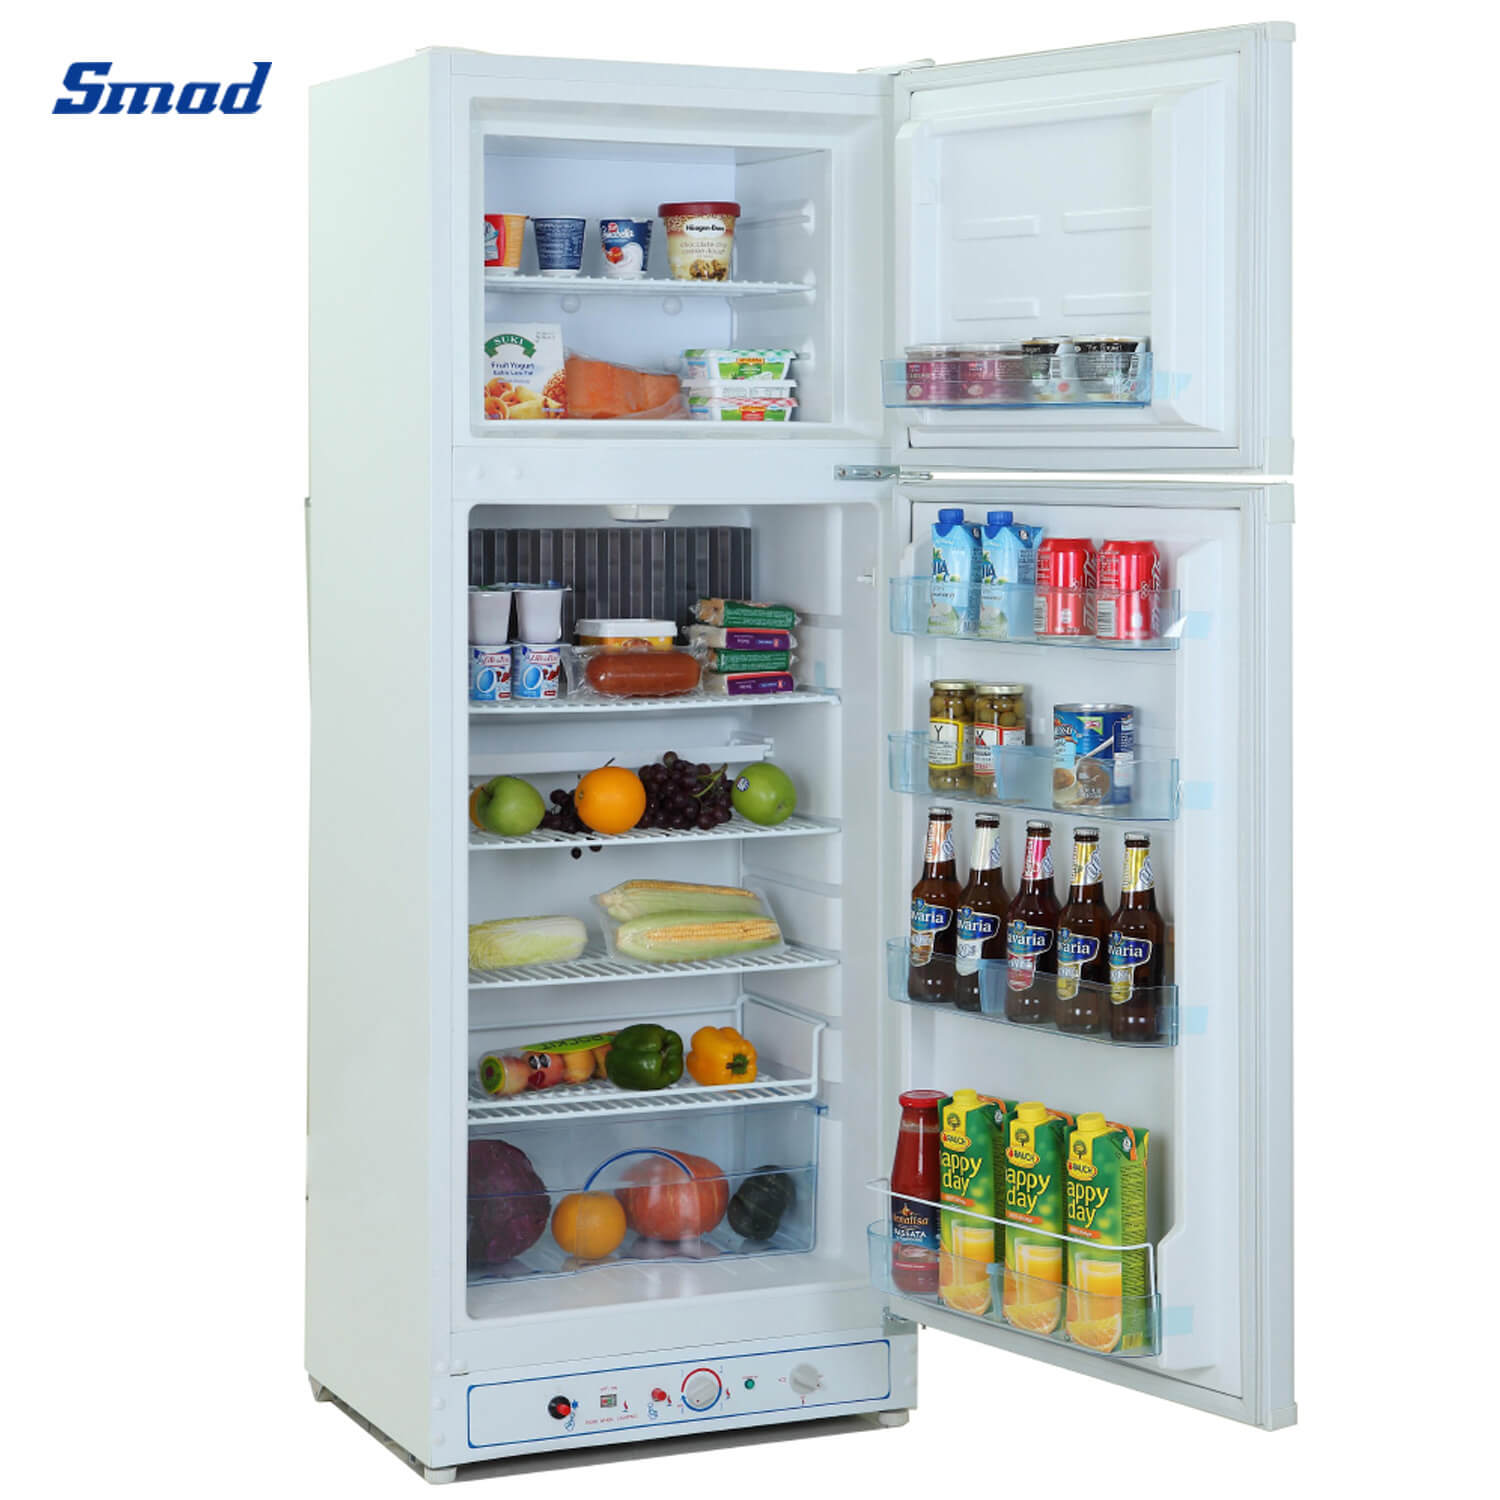 Smad 9.4 Cu. Ft. Double Door Gas/Electric Fridge with Advanced absorption cooling system